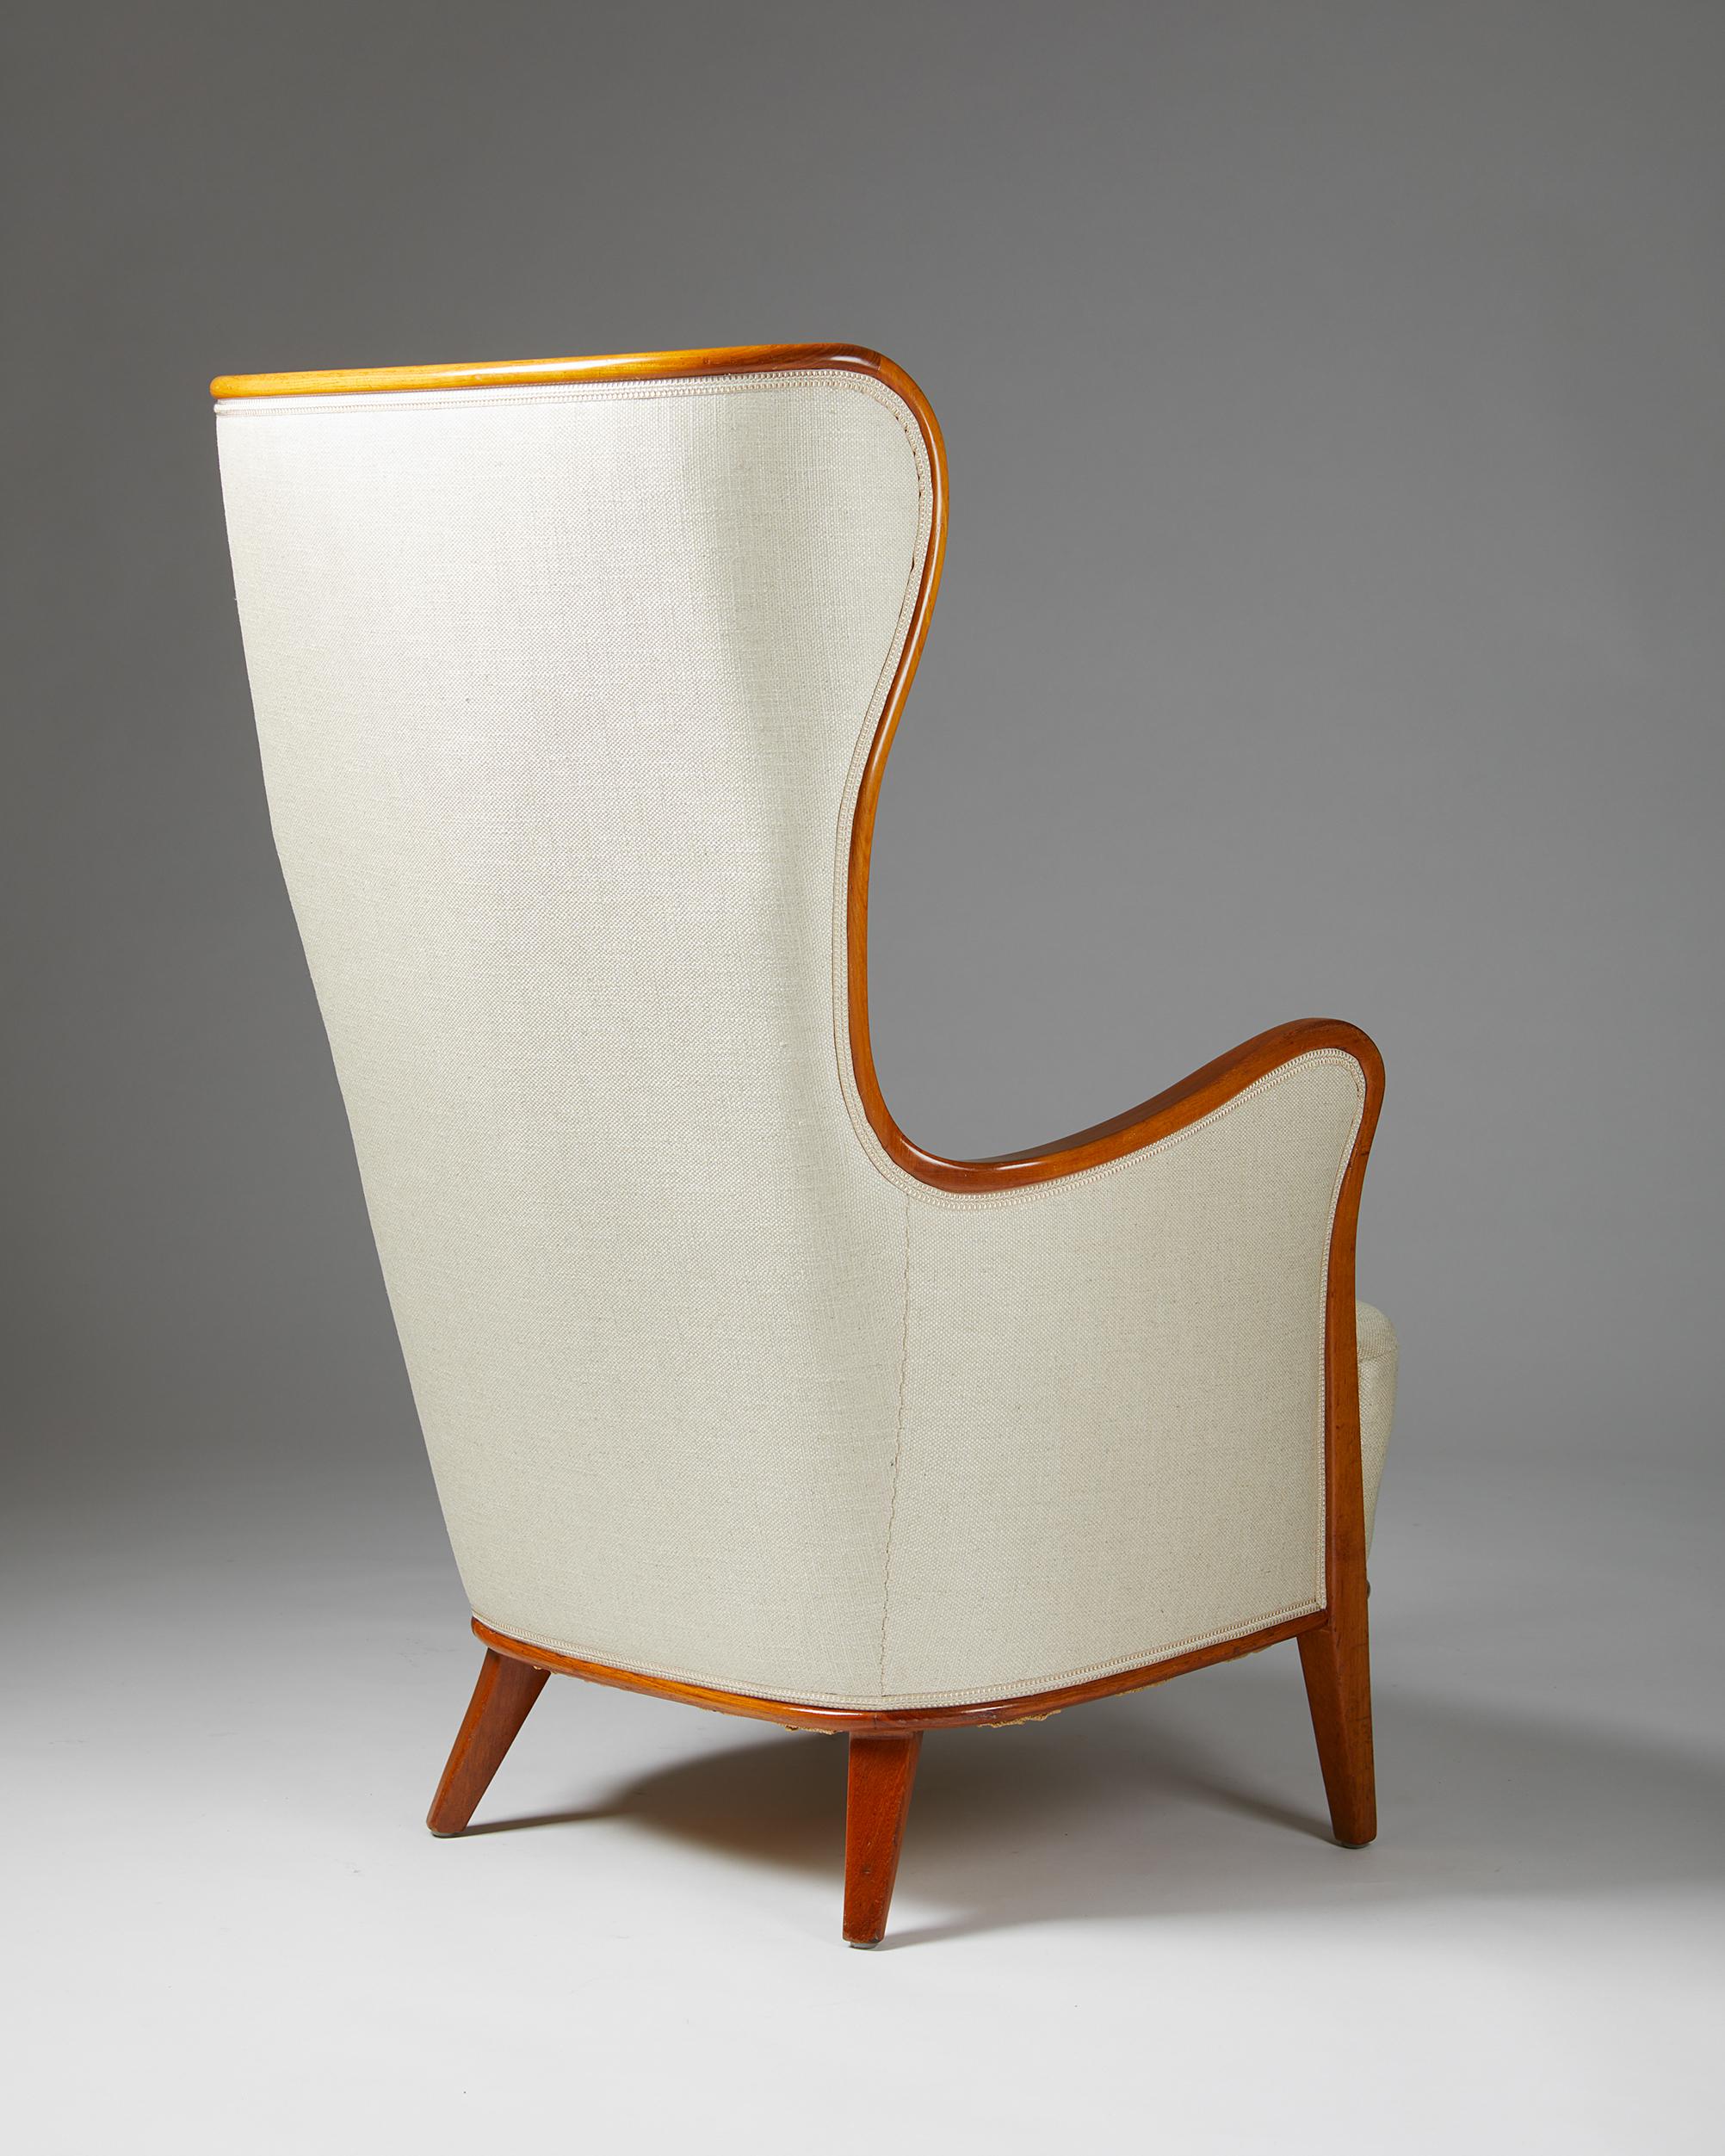 20th Century Pair of High-Back Easy Chairs Designed by Axel Larsson, Sweden, 1940's